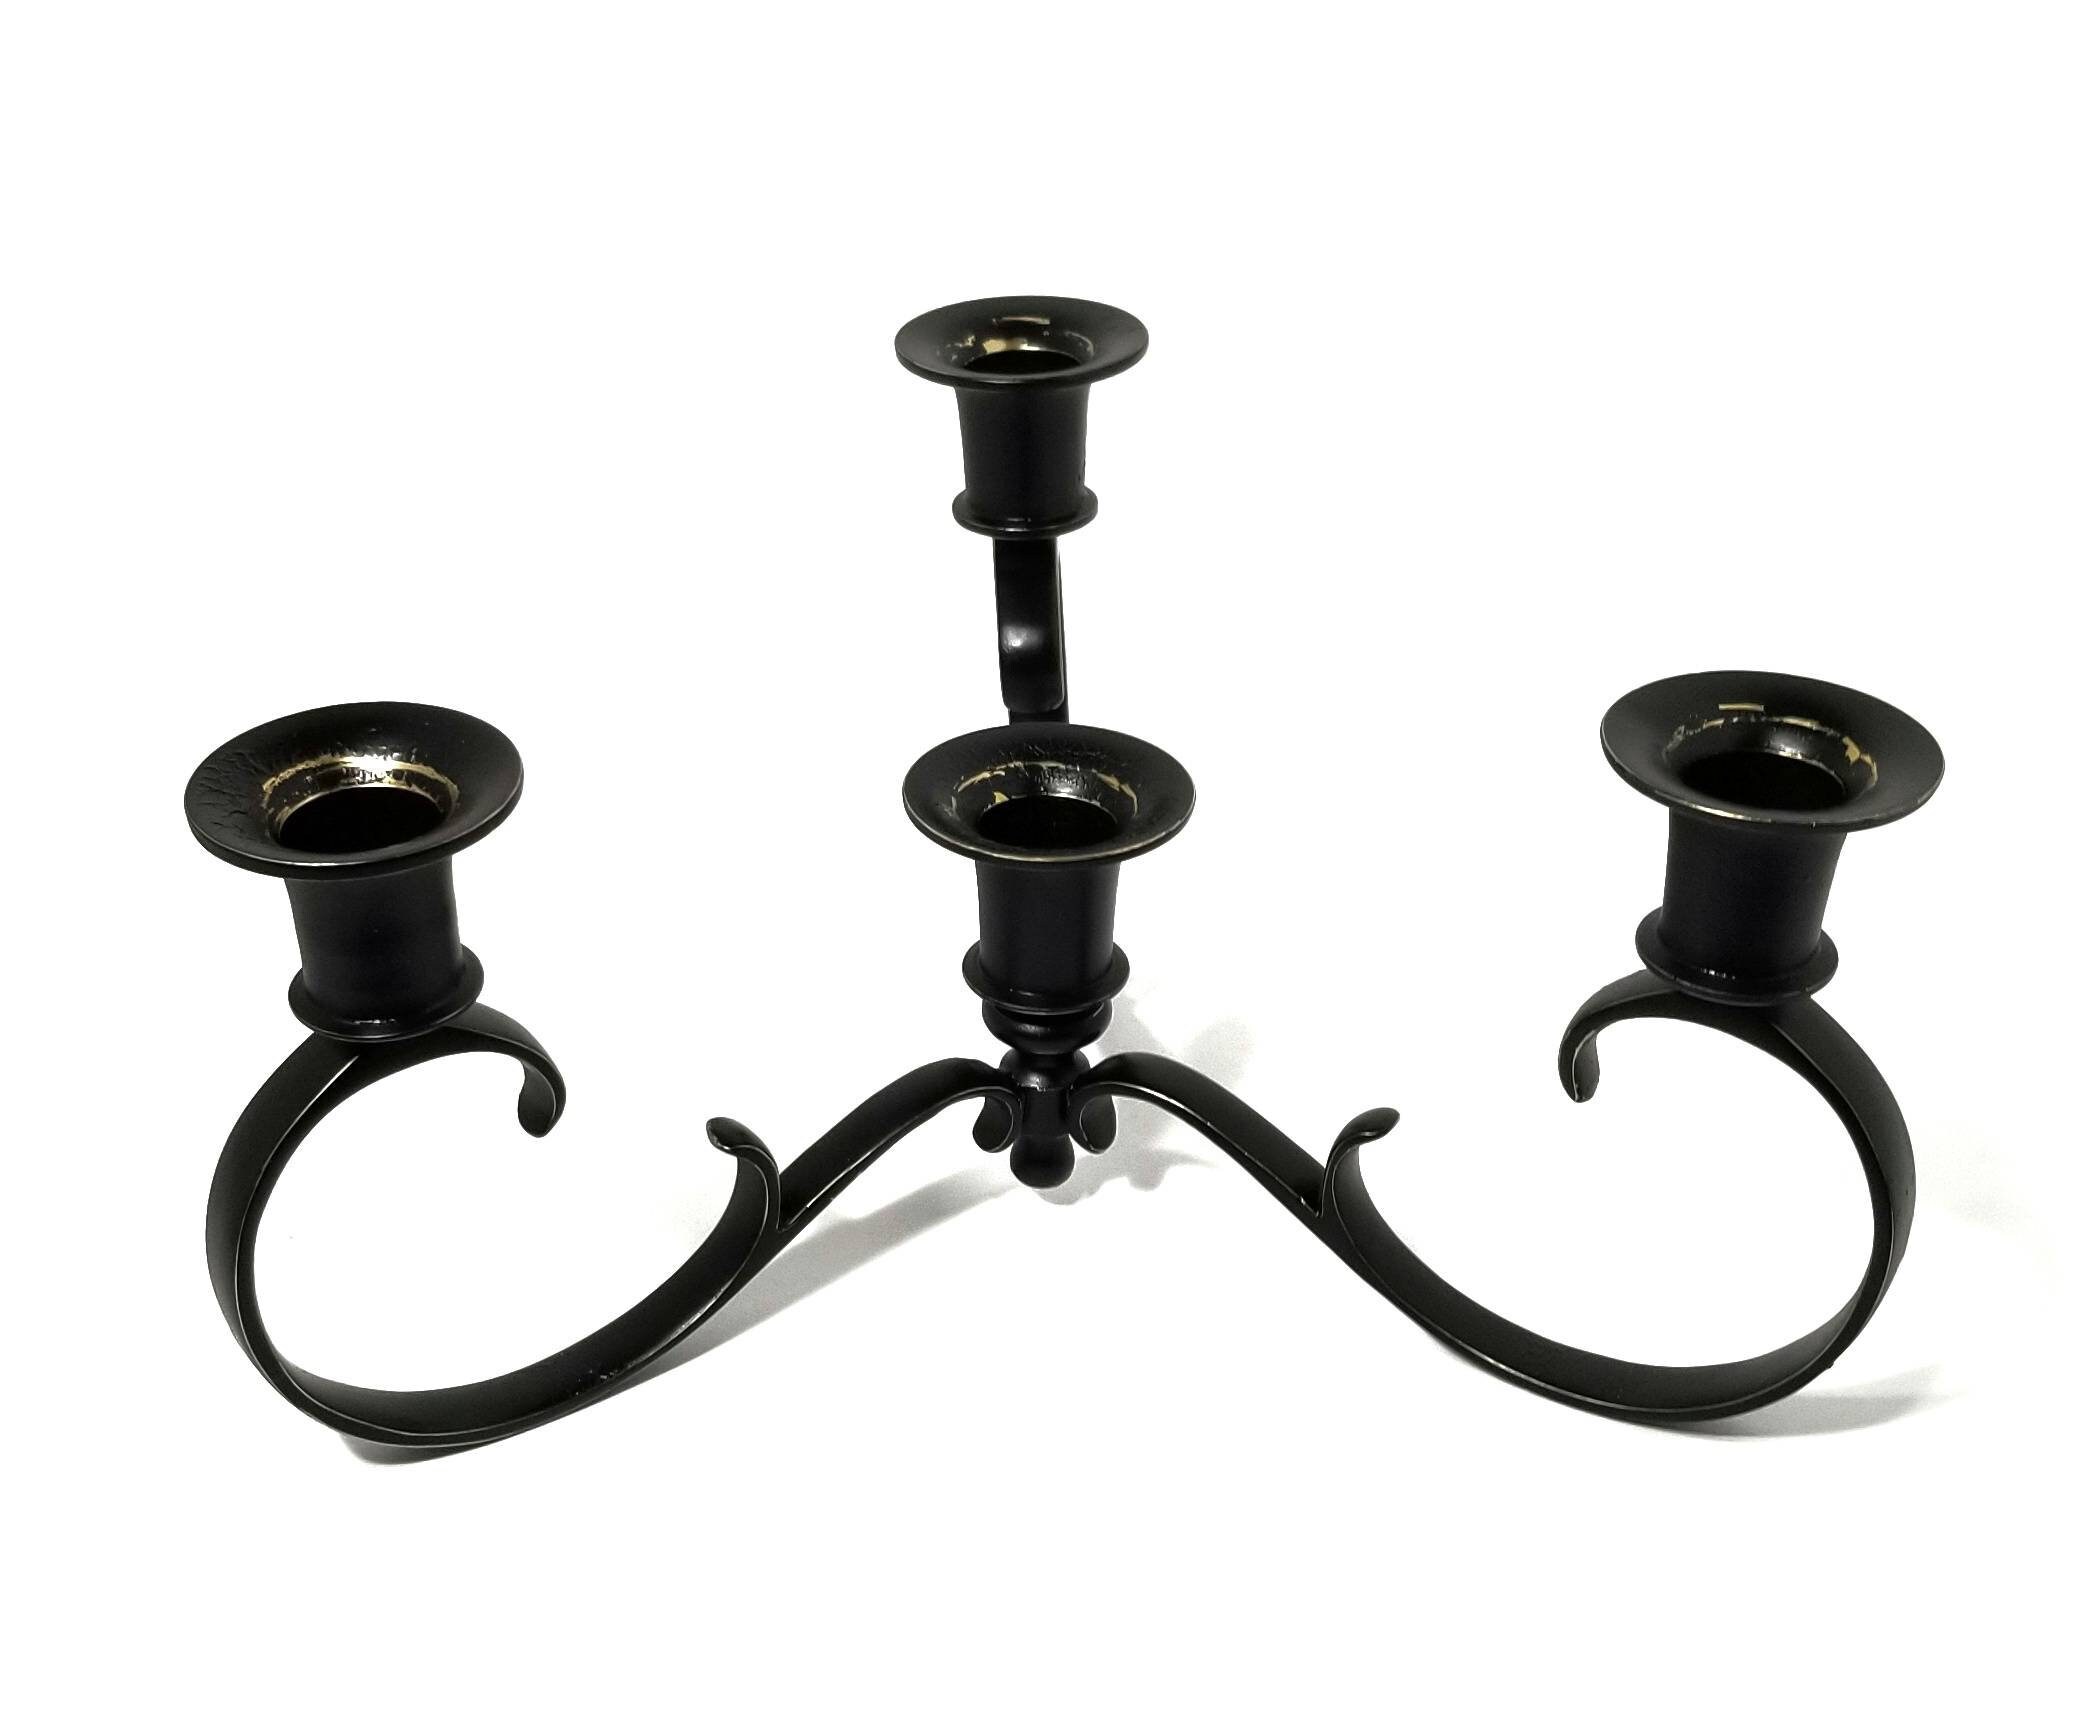 Gothic Candlesticks, Gothic Candle Holders, Gothic Home Decor, Goth Decor, Halloween  Candle Holder, Vintage Brass Candlesticks, Hosley Brass -  Canada